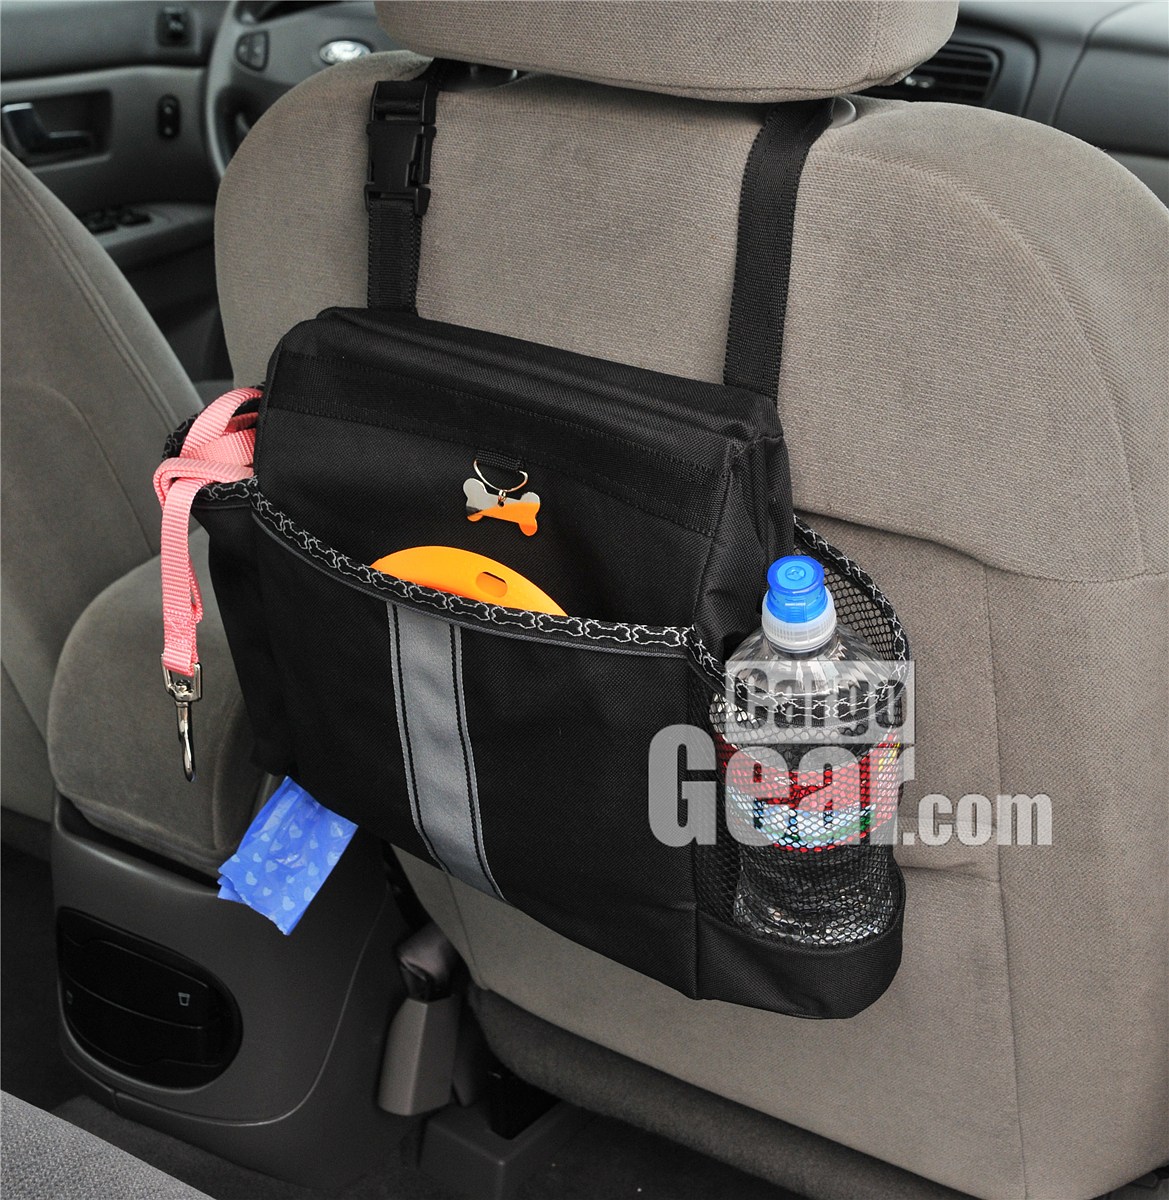 Car Organizer for All Your Dog’s Stuff